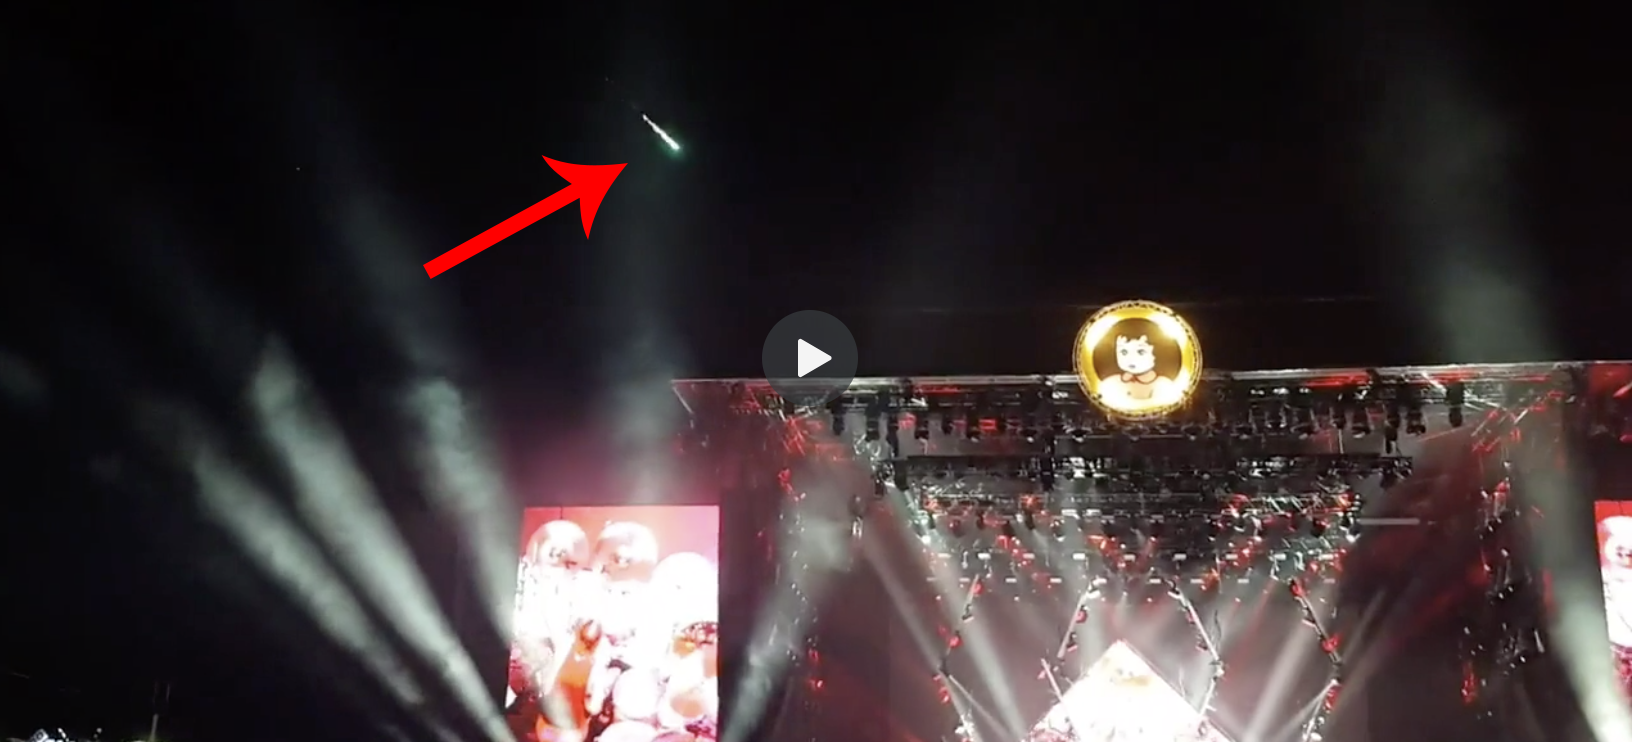 Watch green Meteorite fall from the sky during Foo Fighters’ performance at Pinkpop festival